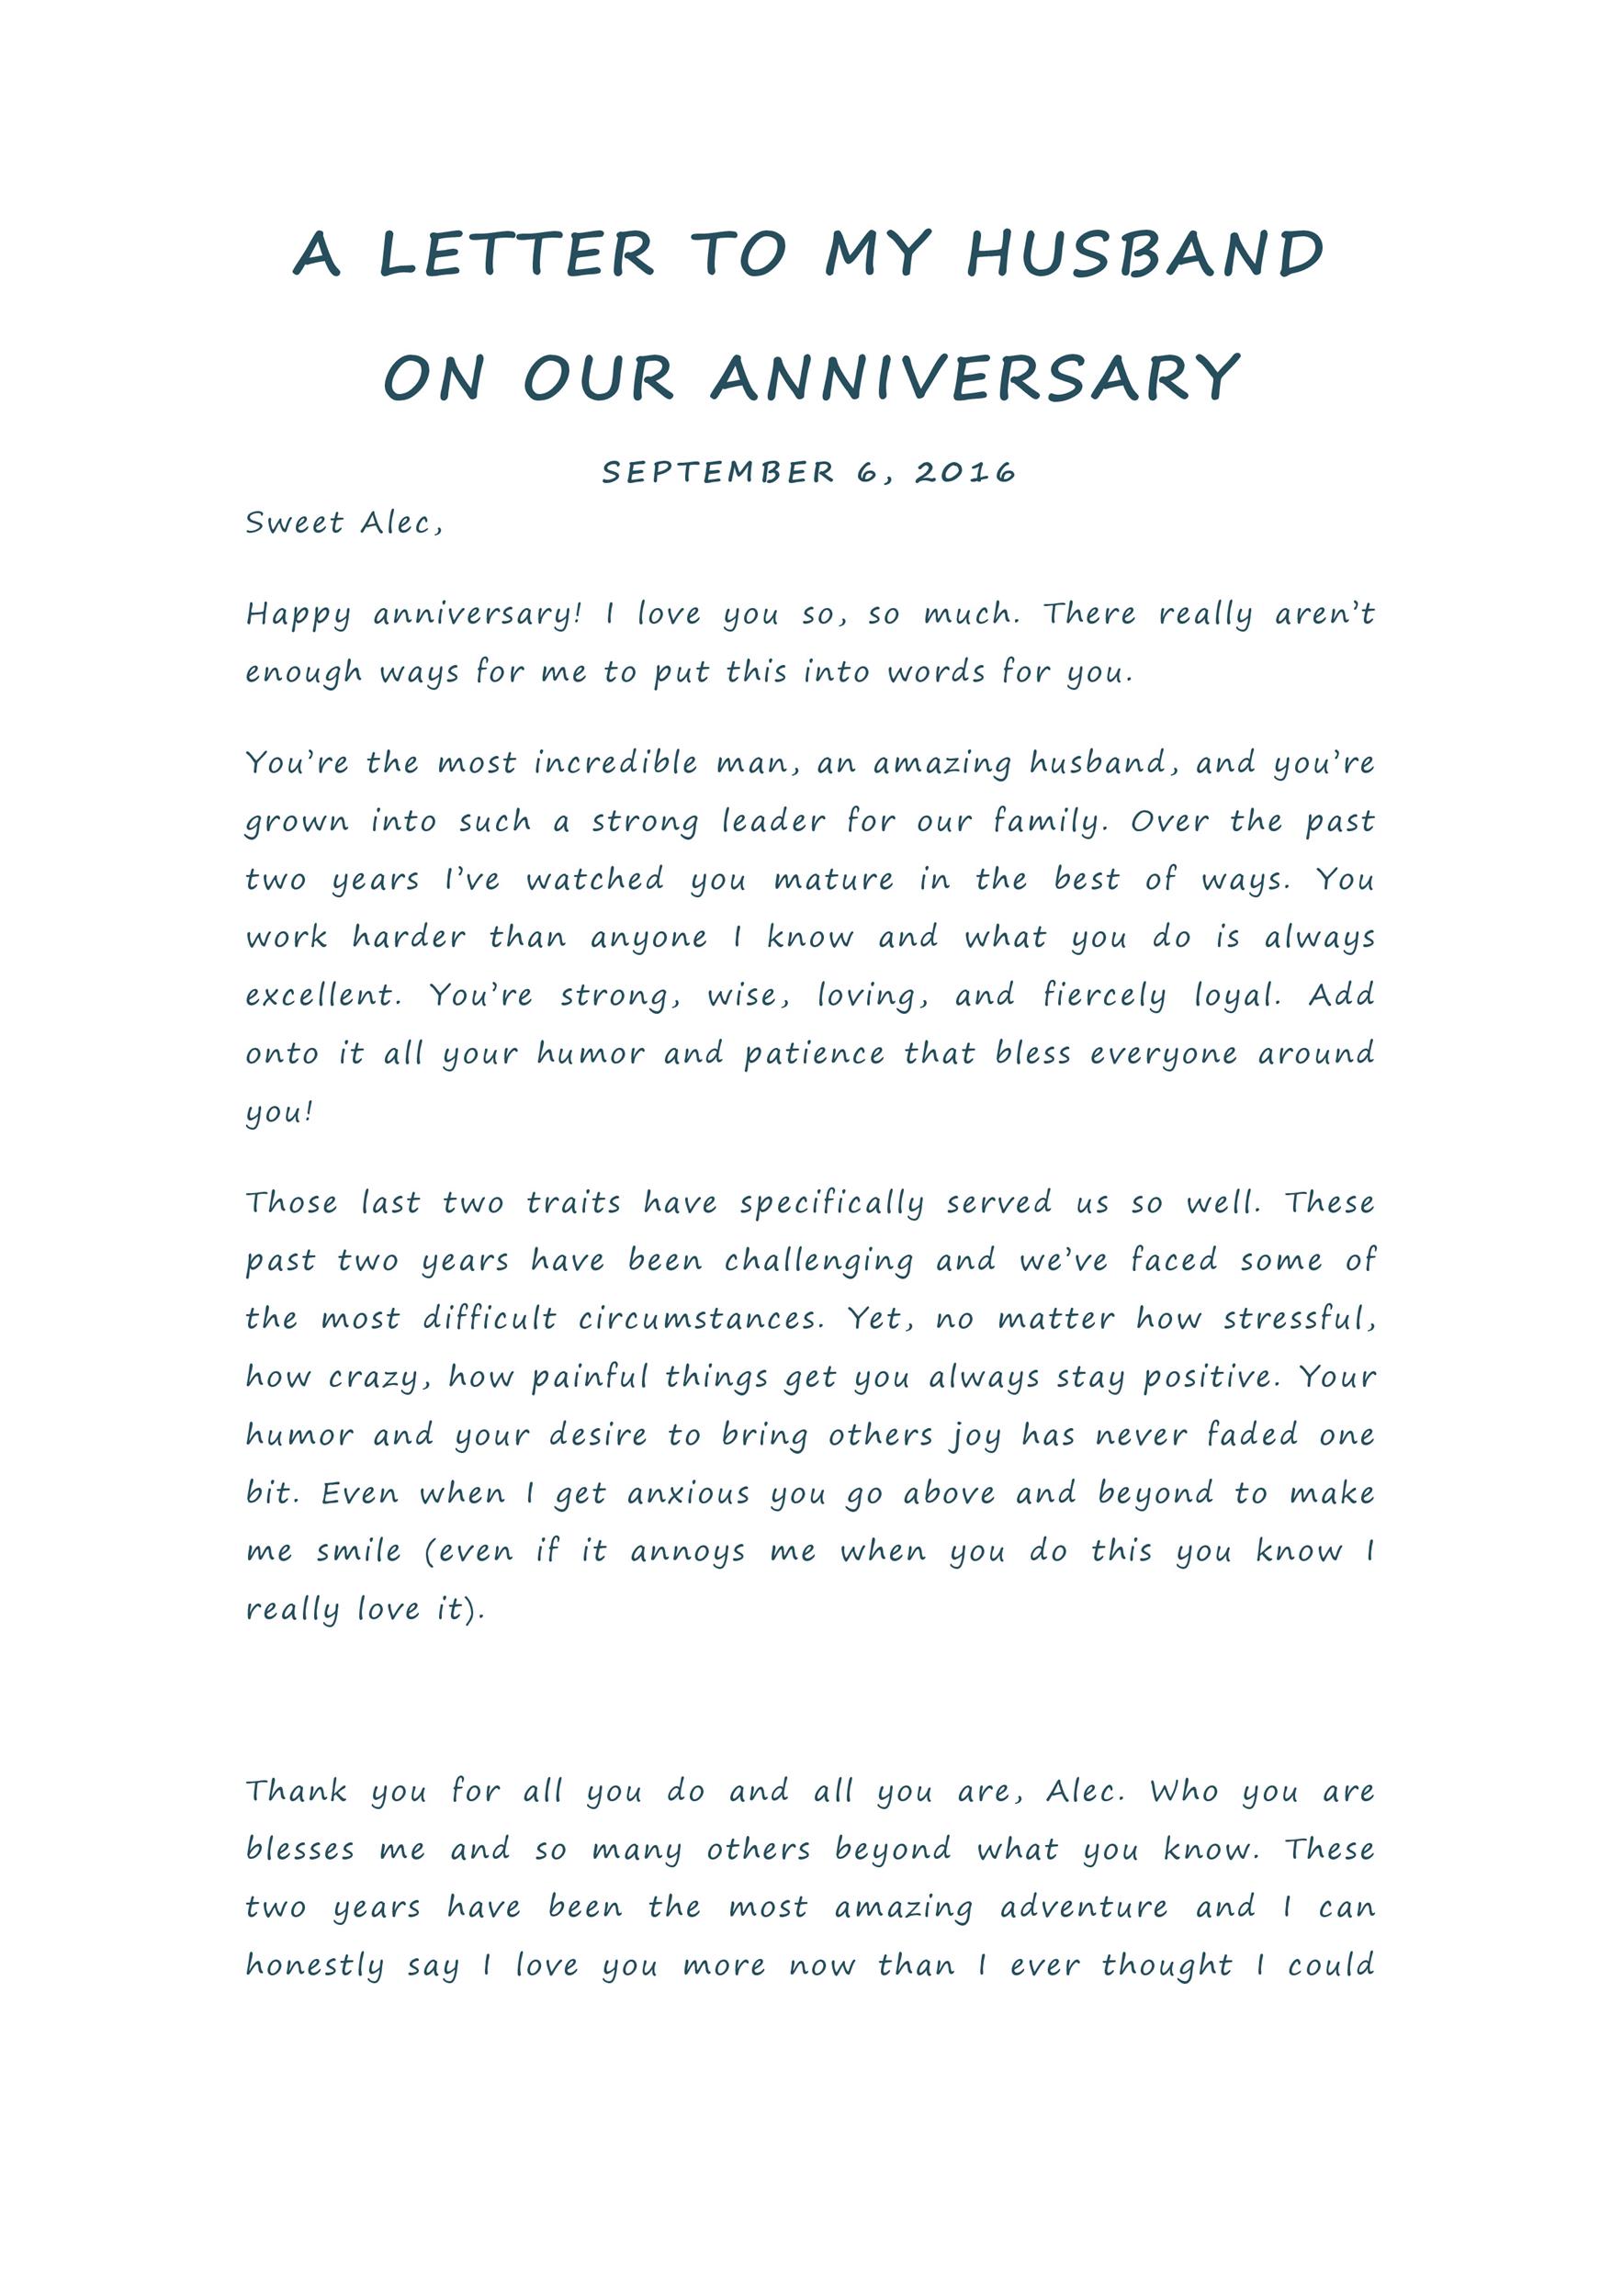 50-romantic-anniversary-letters-for-him-or-her-templatelab